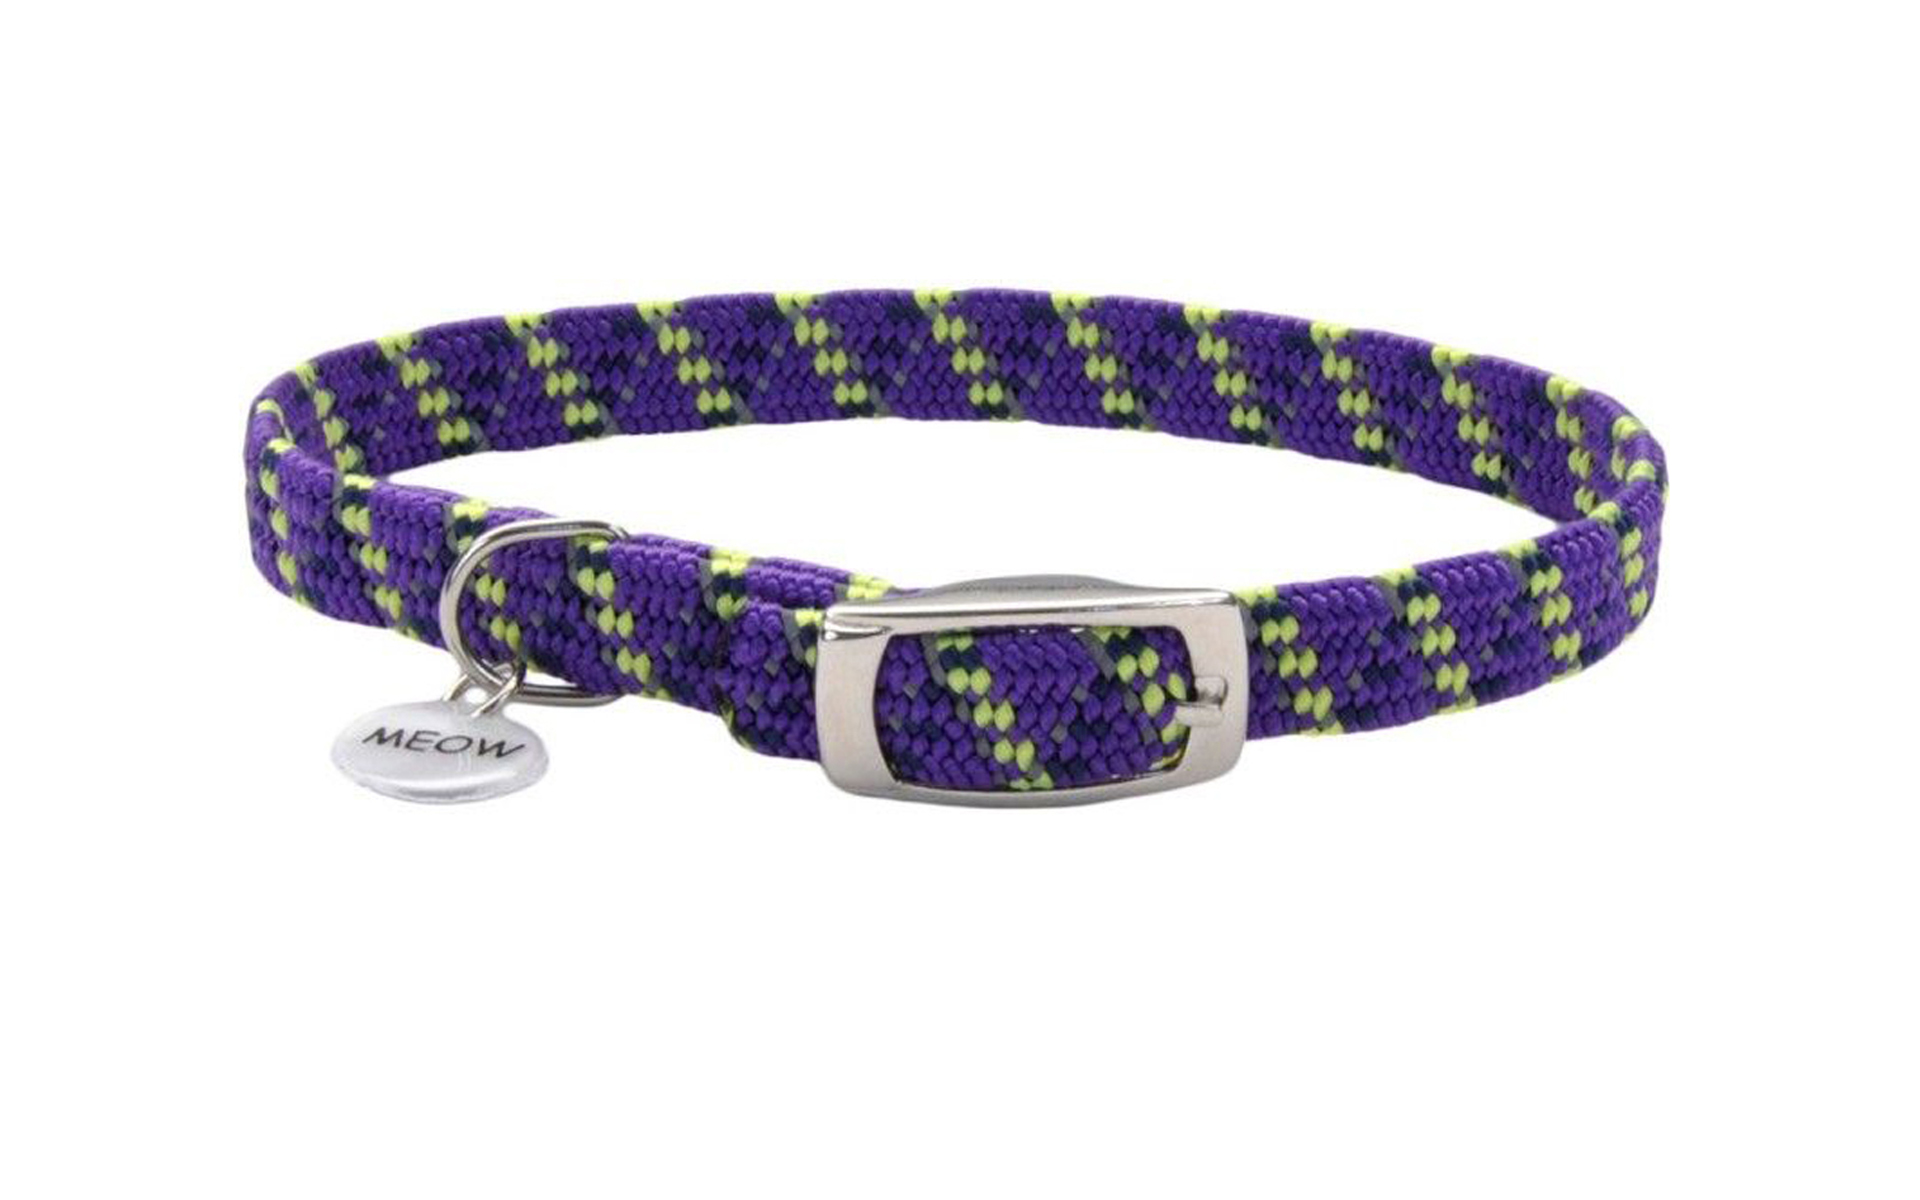 Elastacat Reflective Safety Collar with Charm